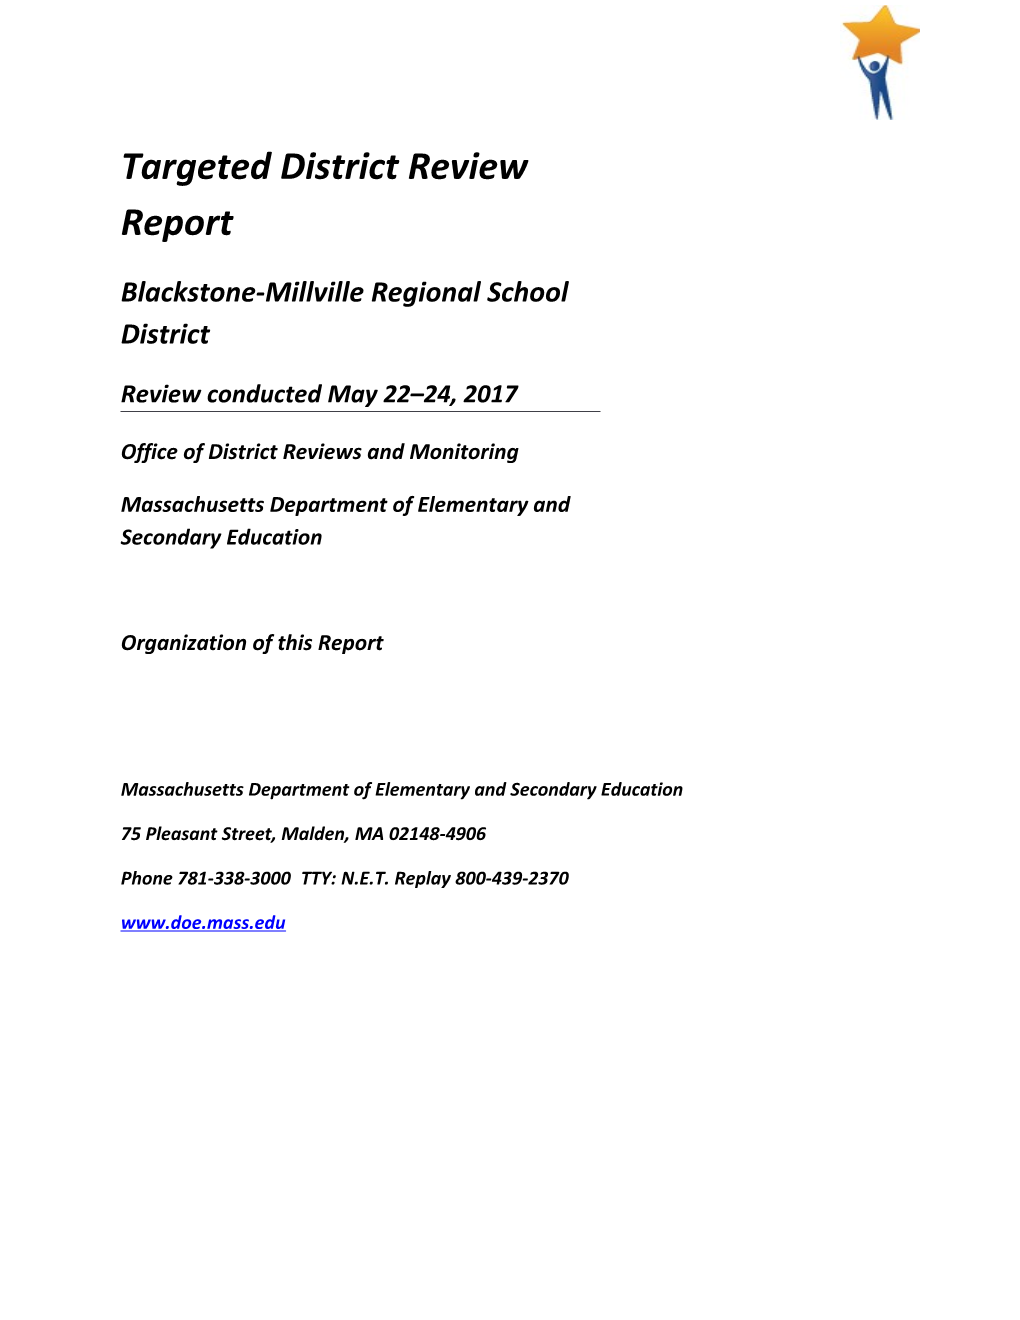 Blackstone-Millville Targeted District Review Report, 2017 Onsite